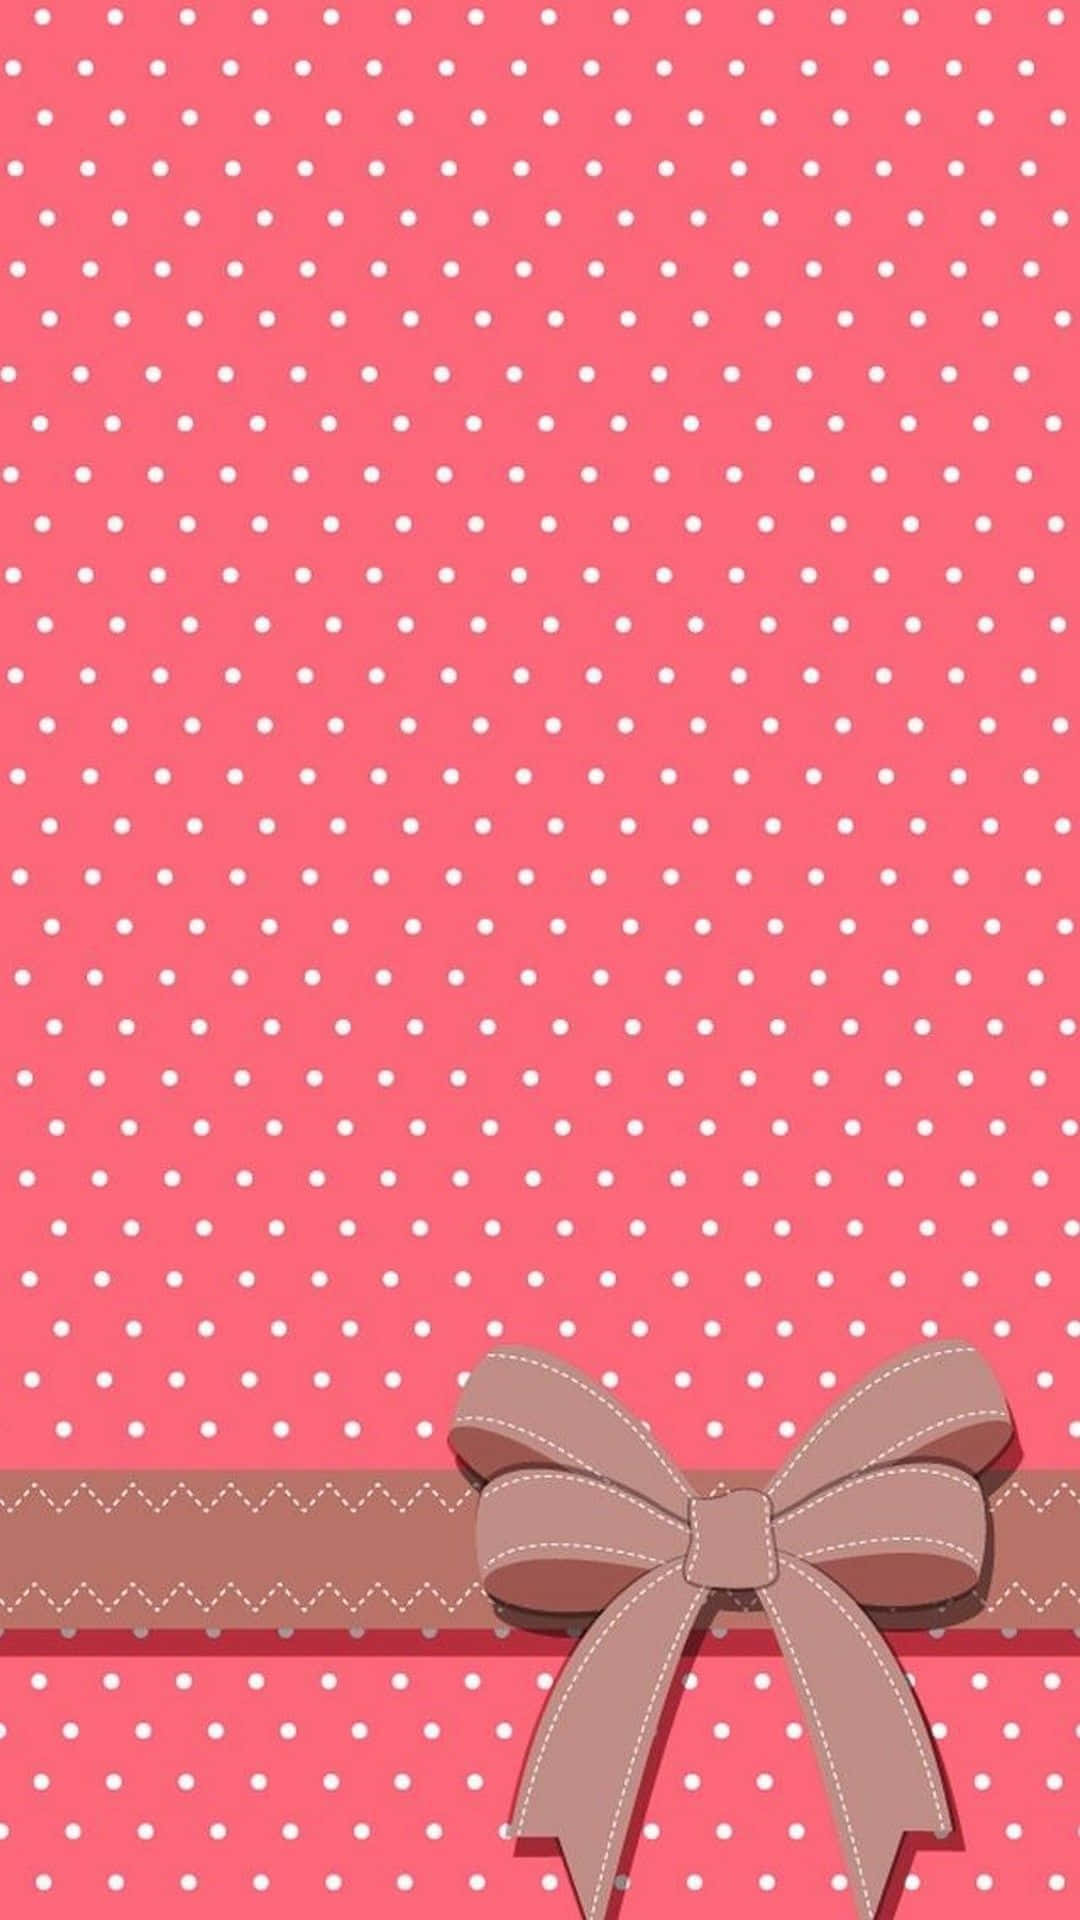 A perfect representation of an effortless girly style. Wallpaper